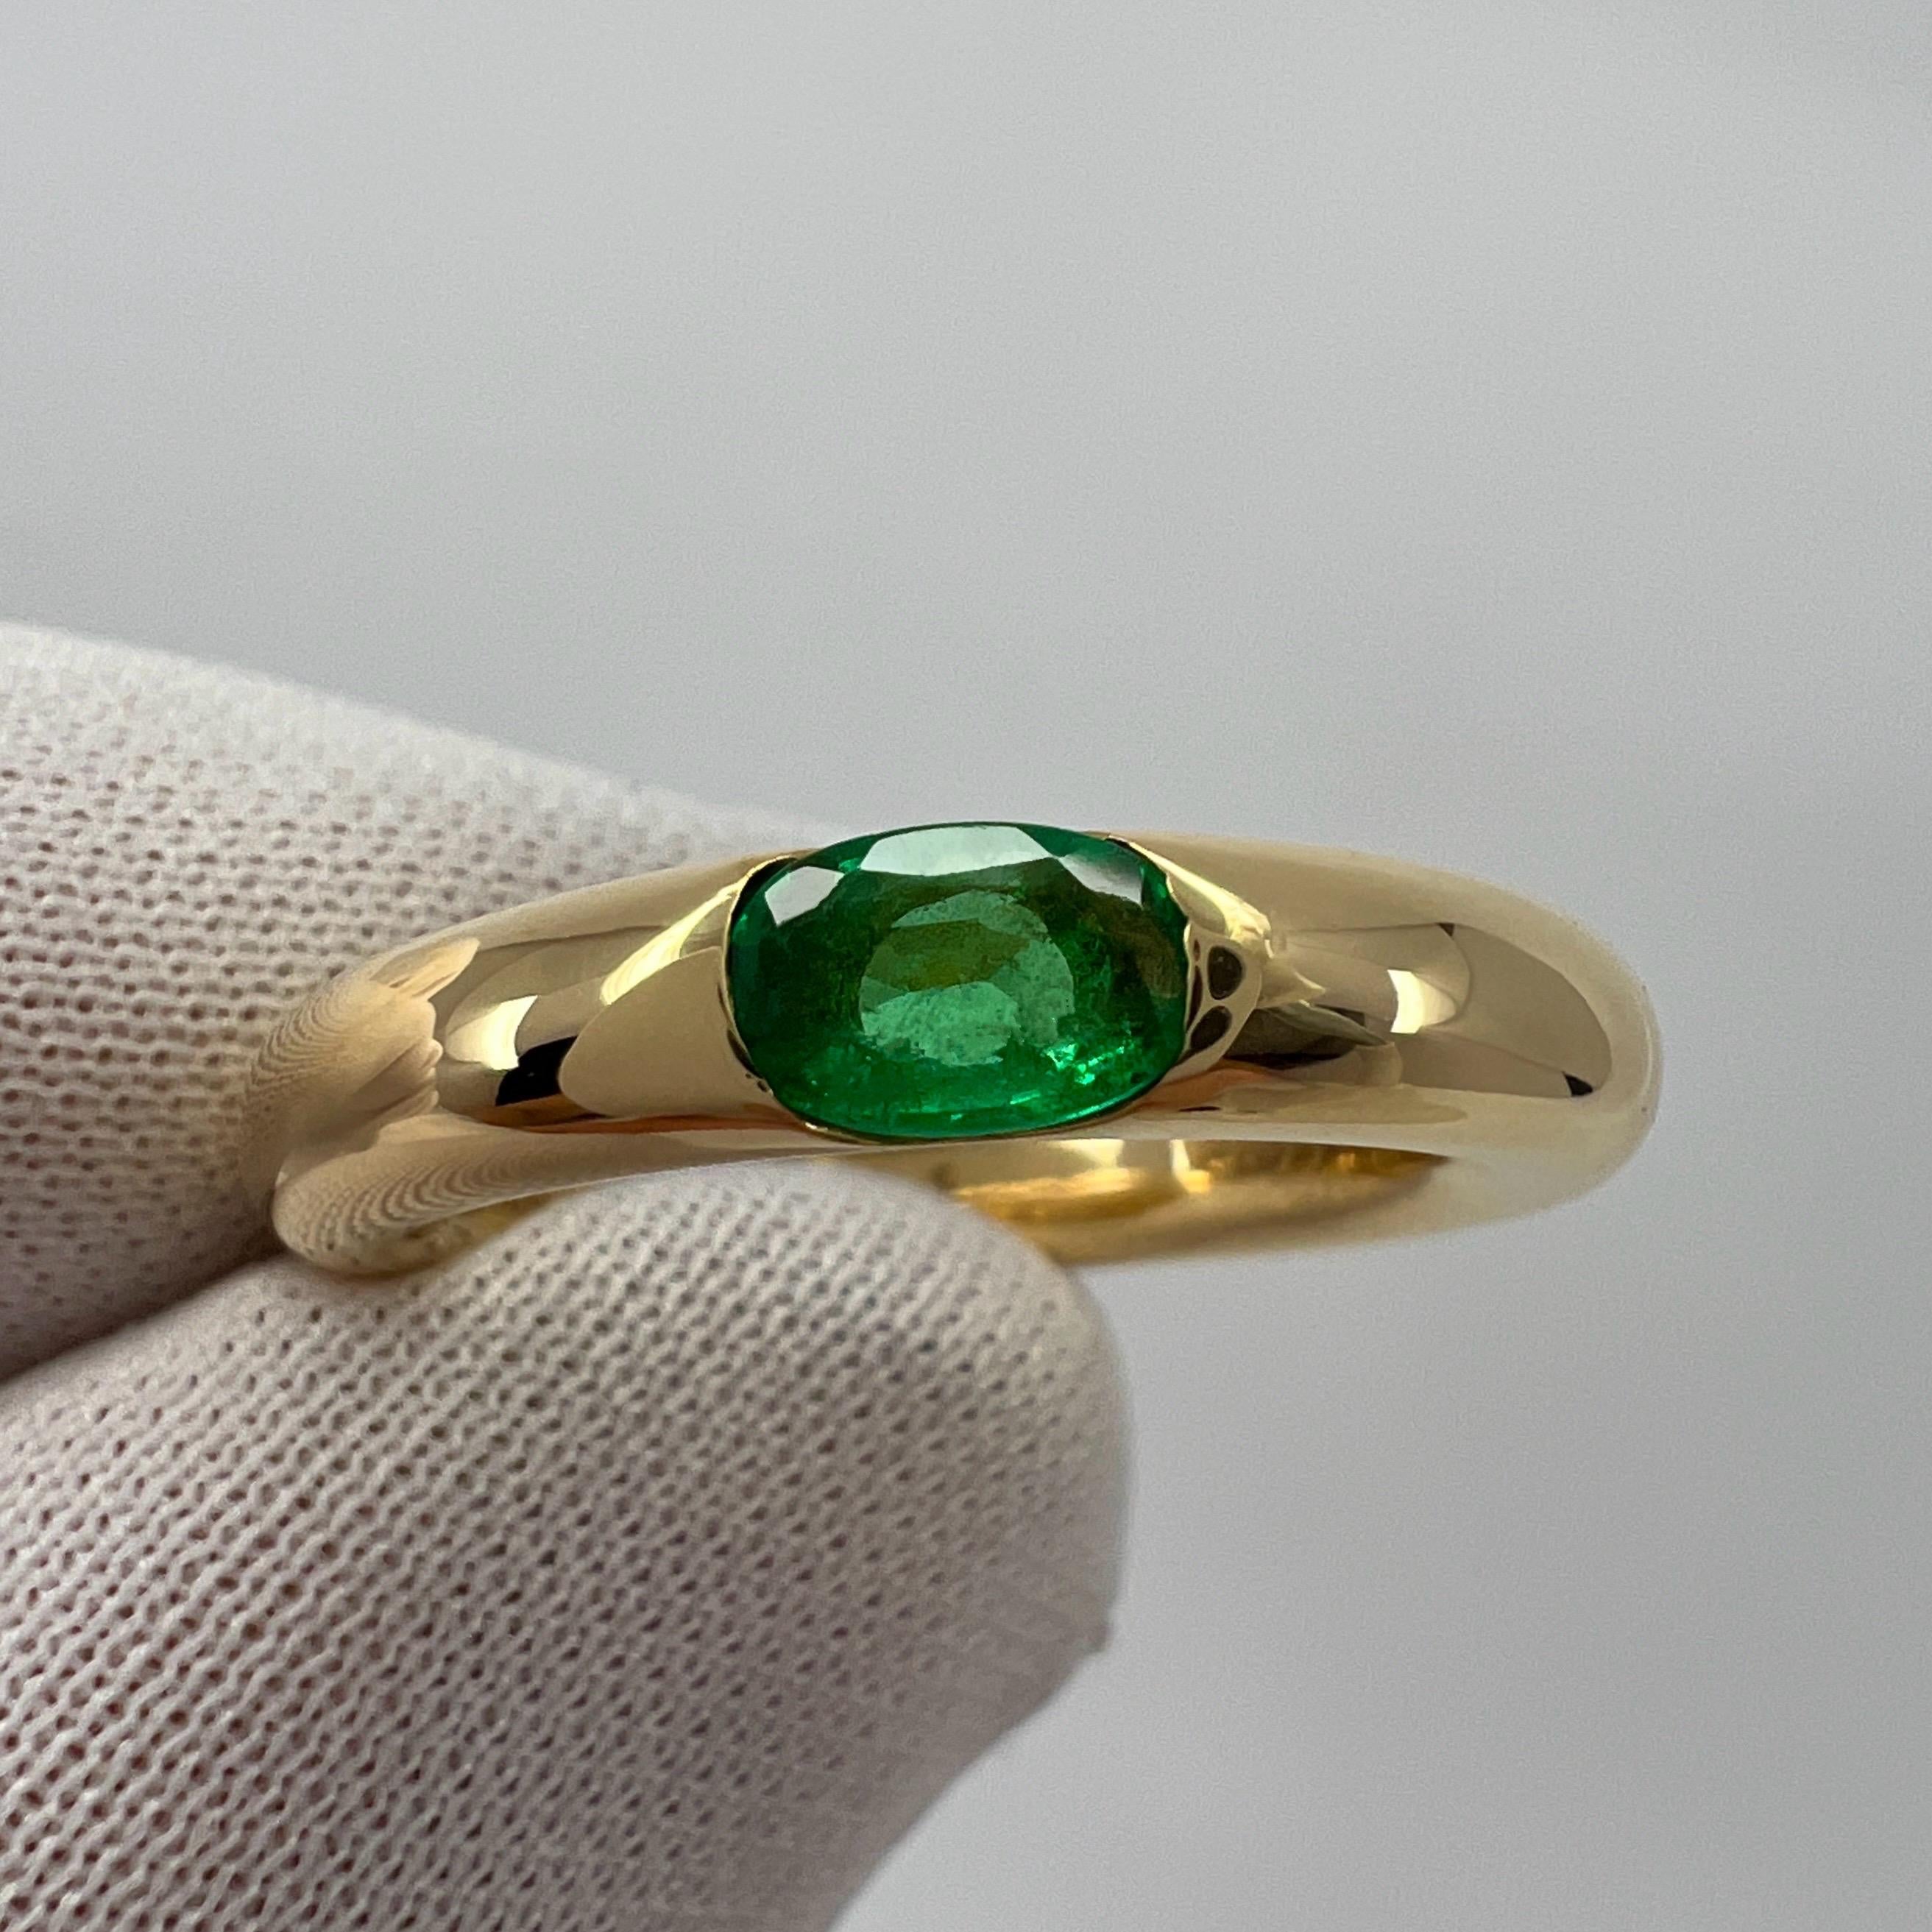 Vintage Cartier Emerald Vivid Green Ellipse 18k Yellow Gold Solitaire Ring 52 2